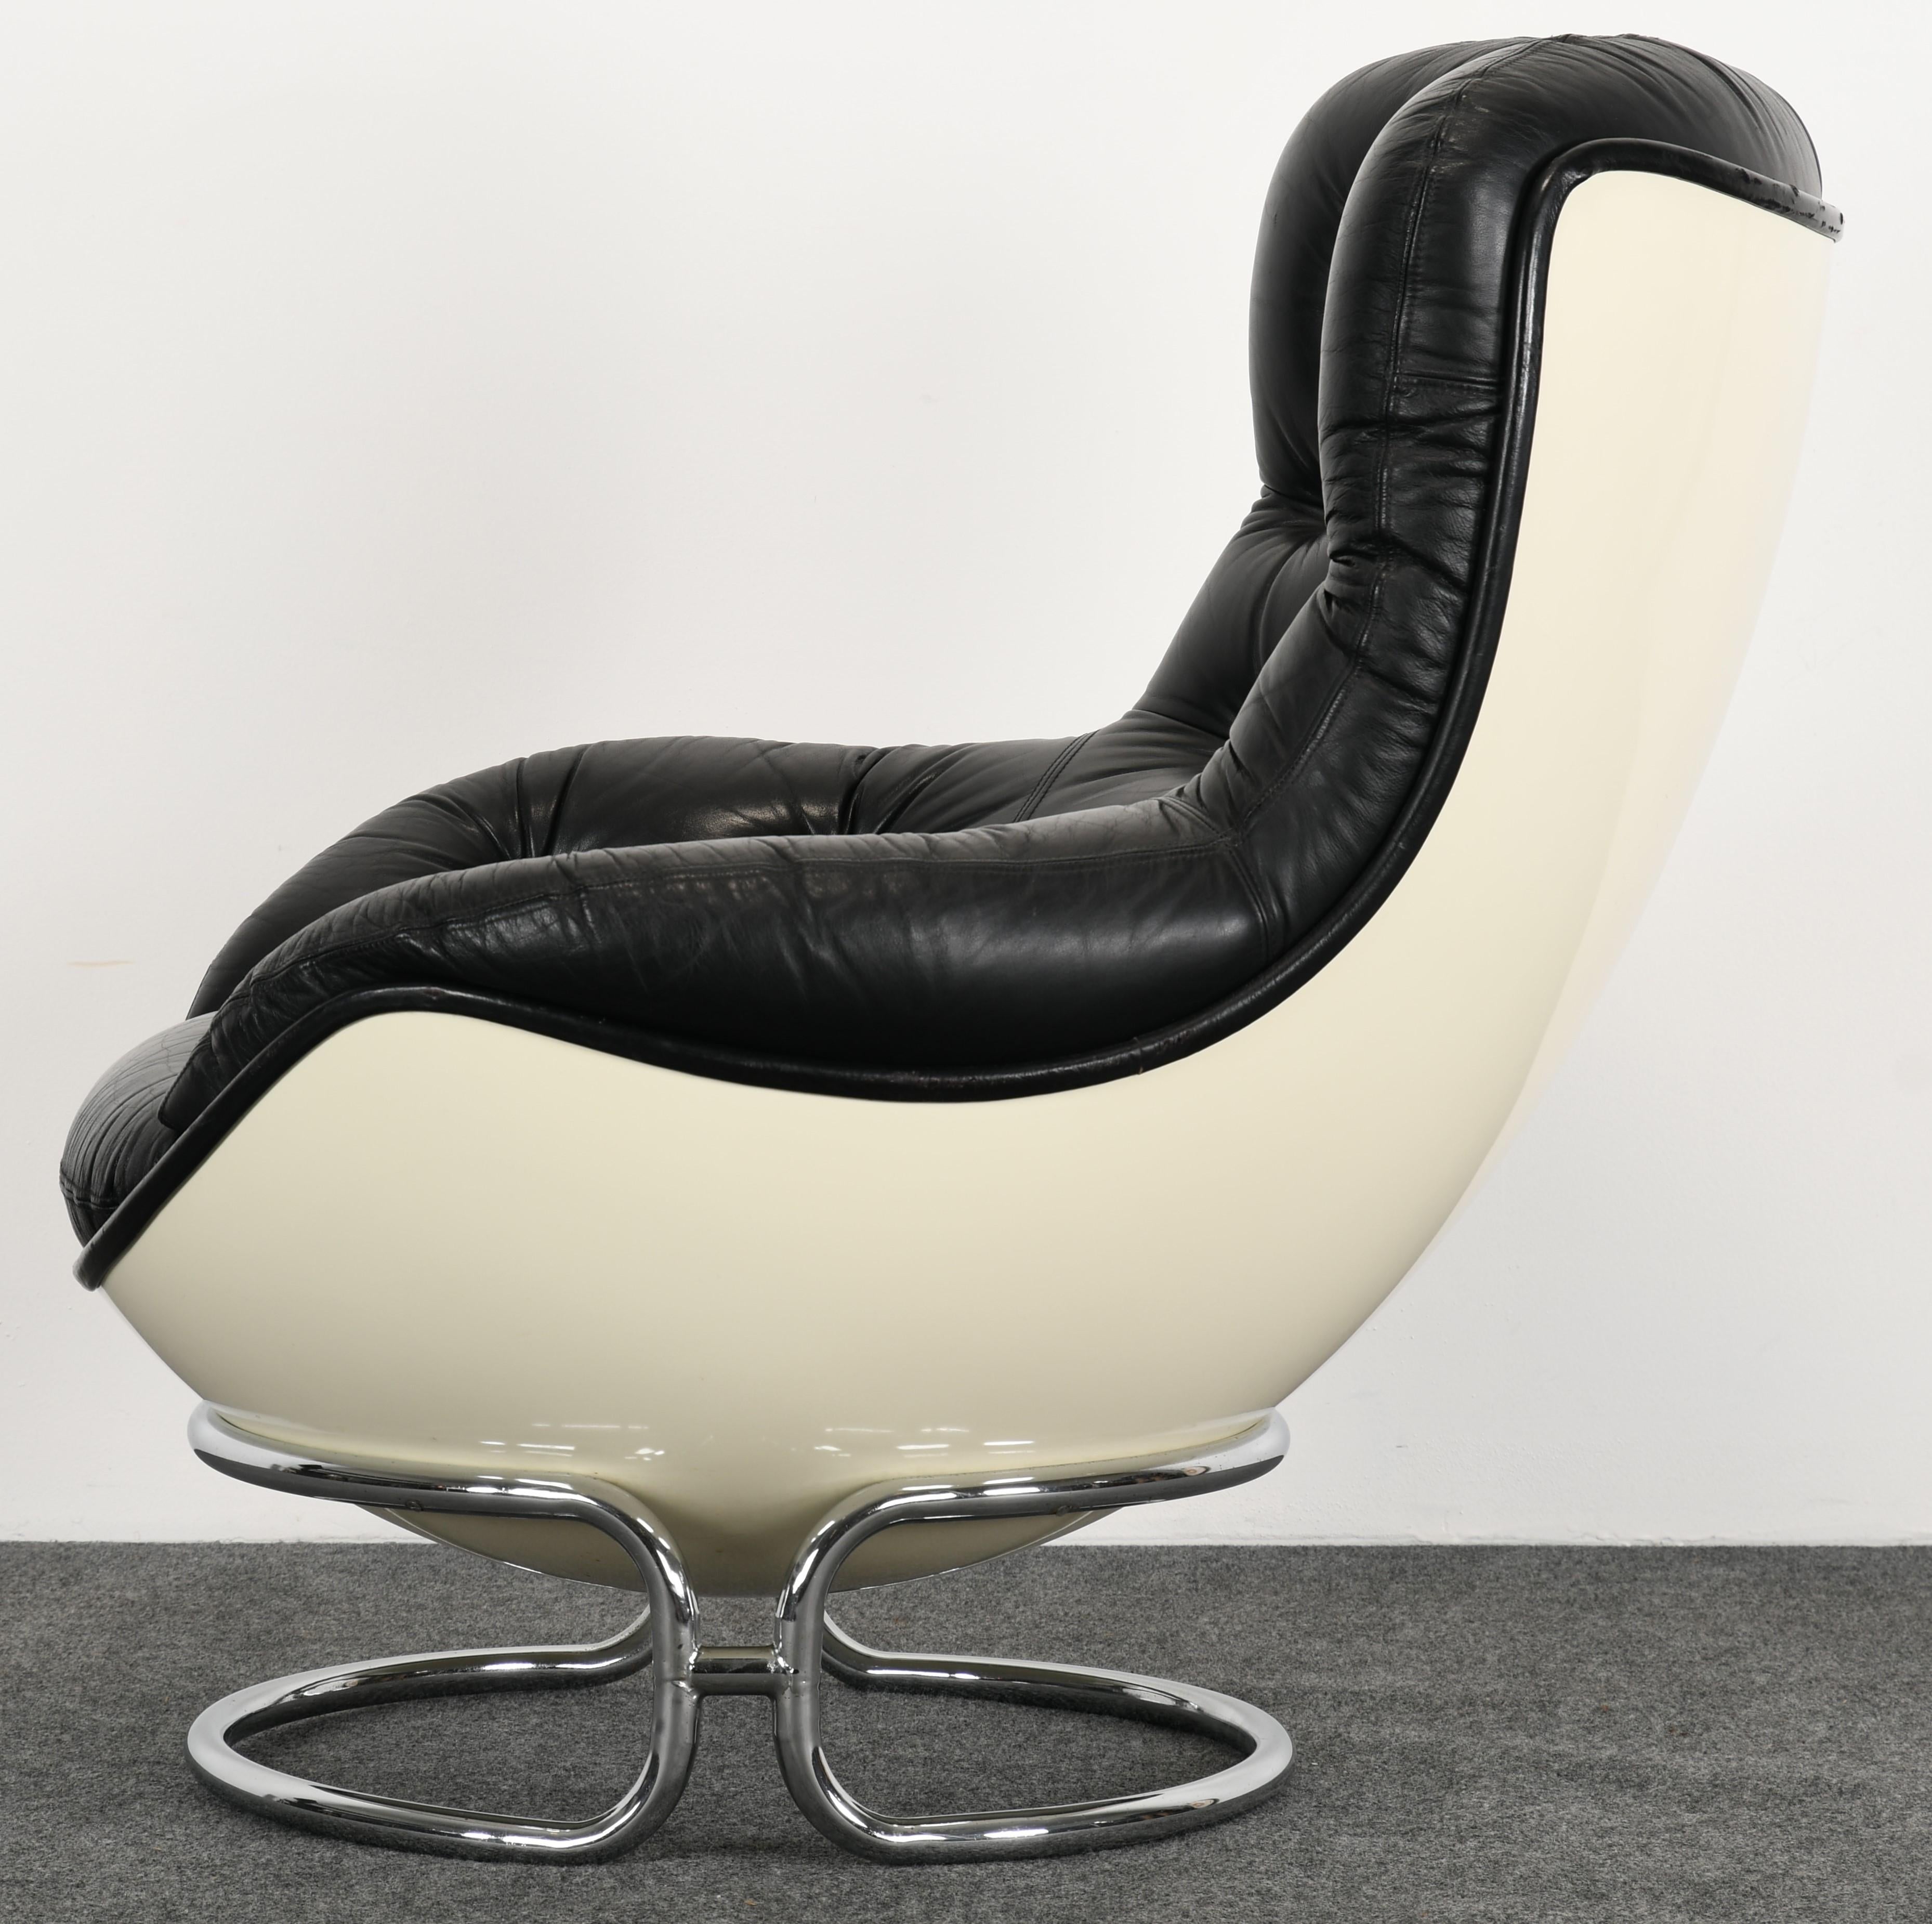 A modernist armchair designed by Michel Cadestin for French Furniture Manufacturer, Airborne, 1970s. This is a great lounge chair with a white molded fiberglass shell and chrome base. This chair has the original leather showing some wear to edges